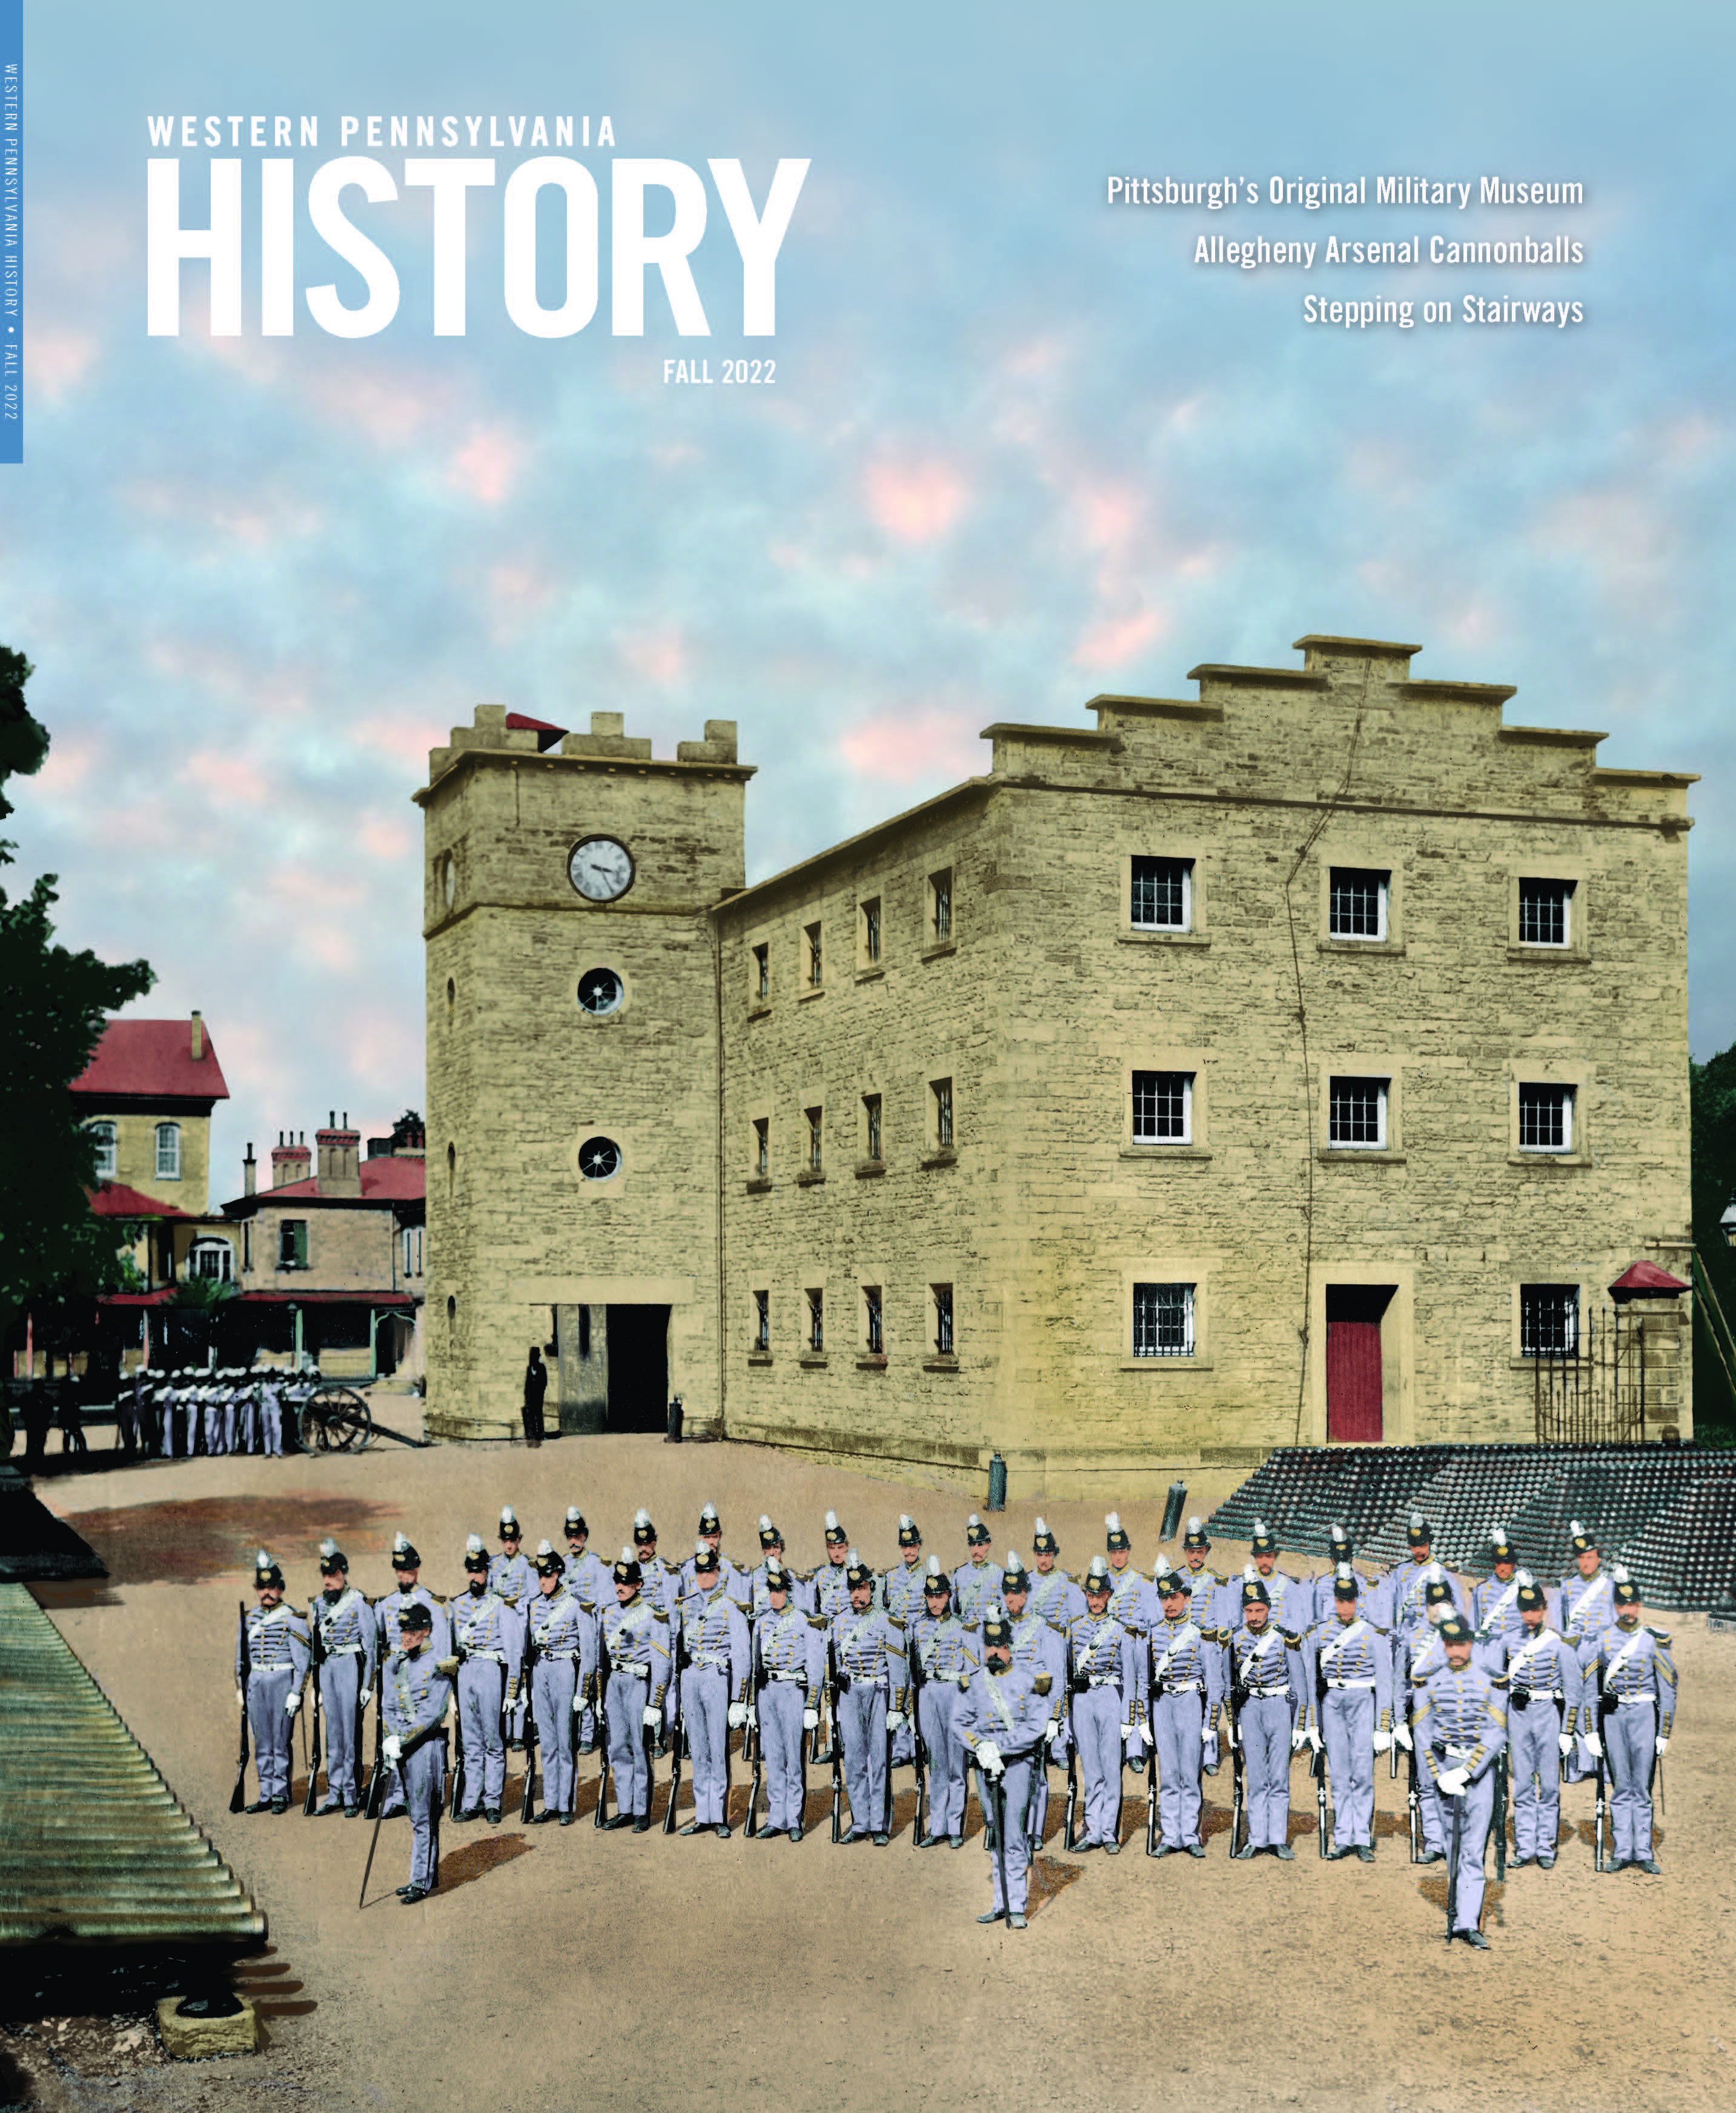 Magazine cover with photo of a group of uniformed men standing amid piles of cannonballs outside a stone building.